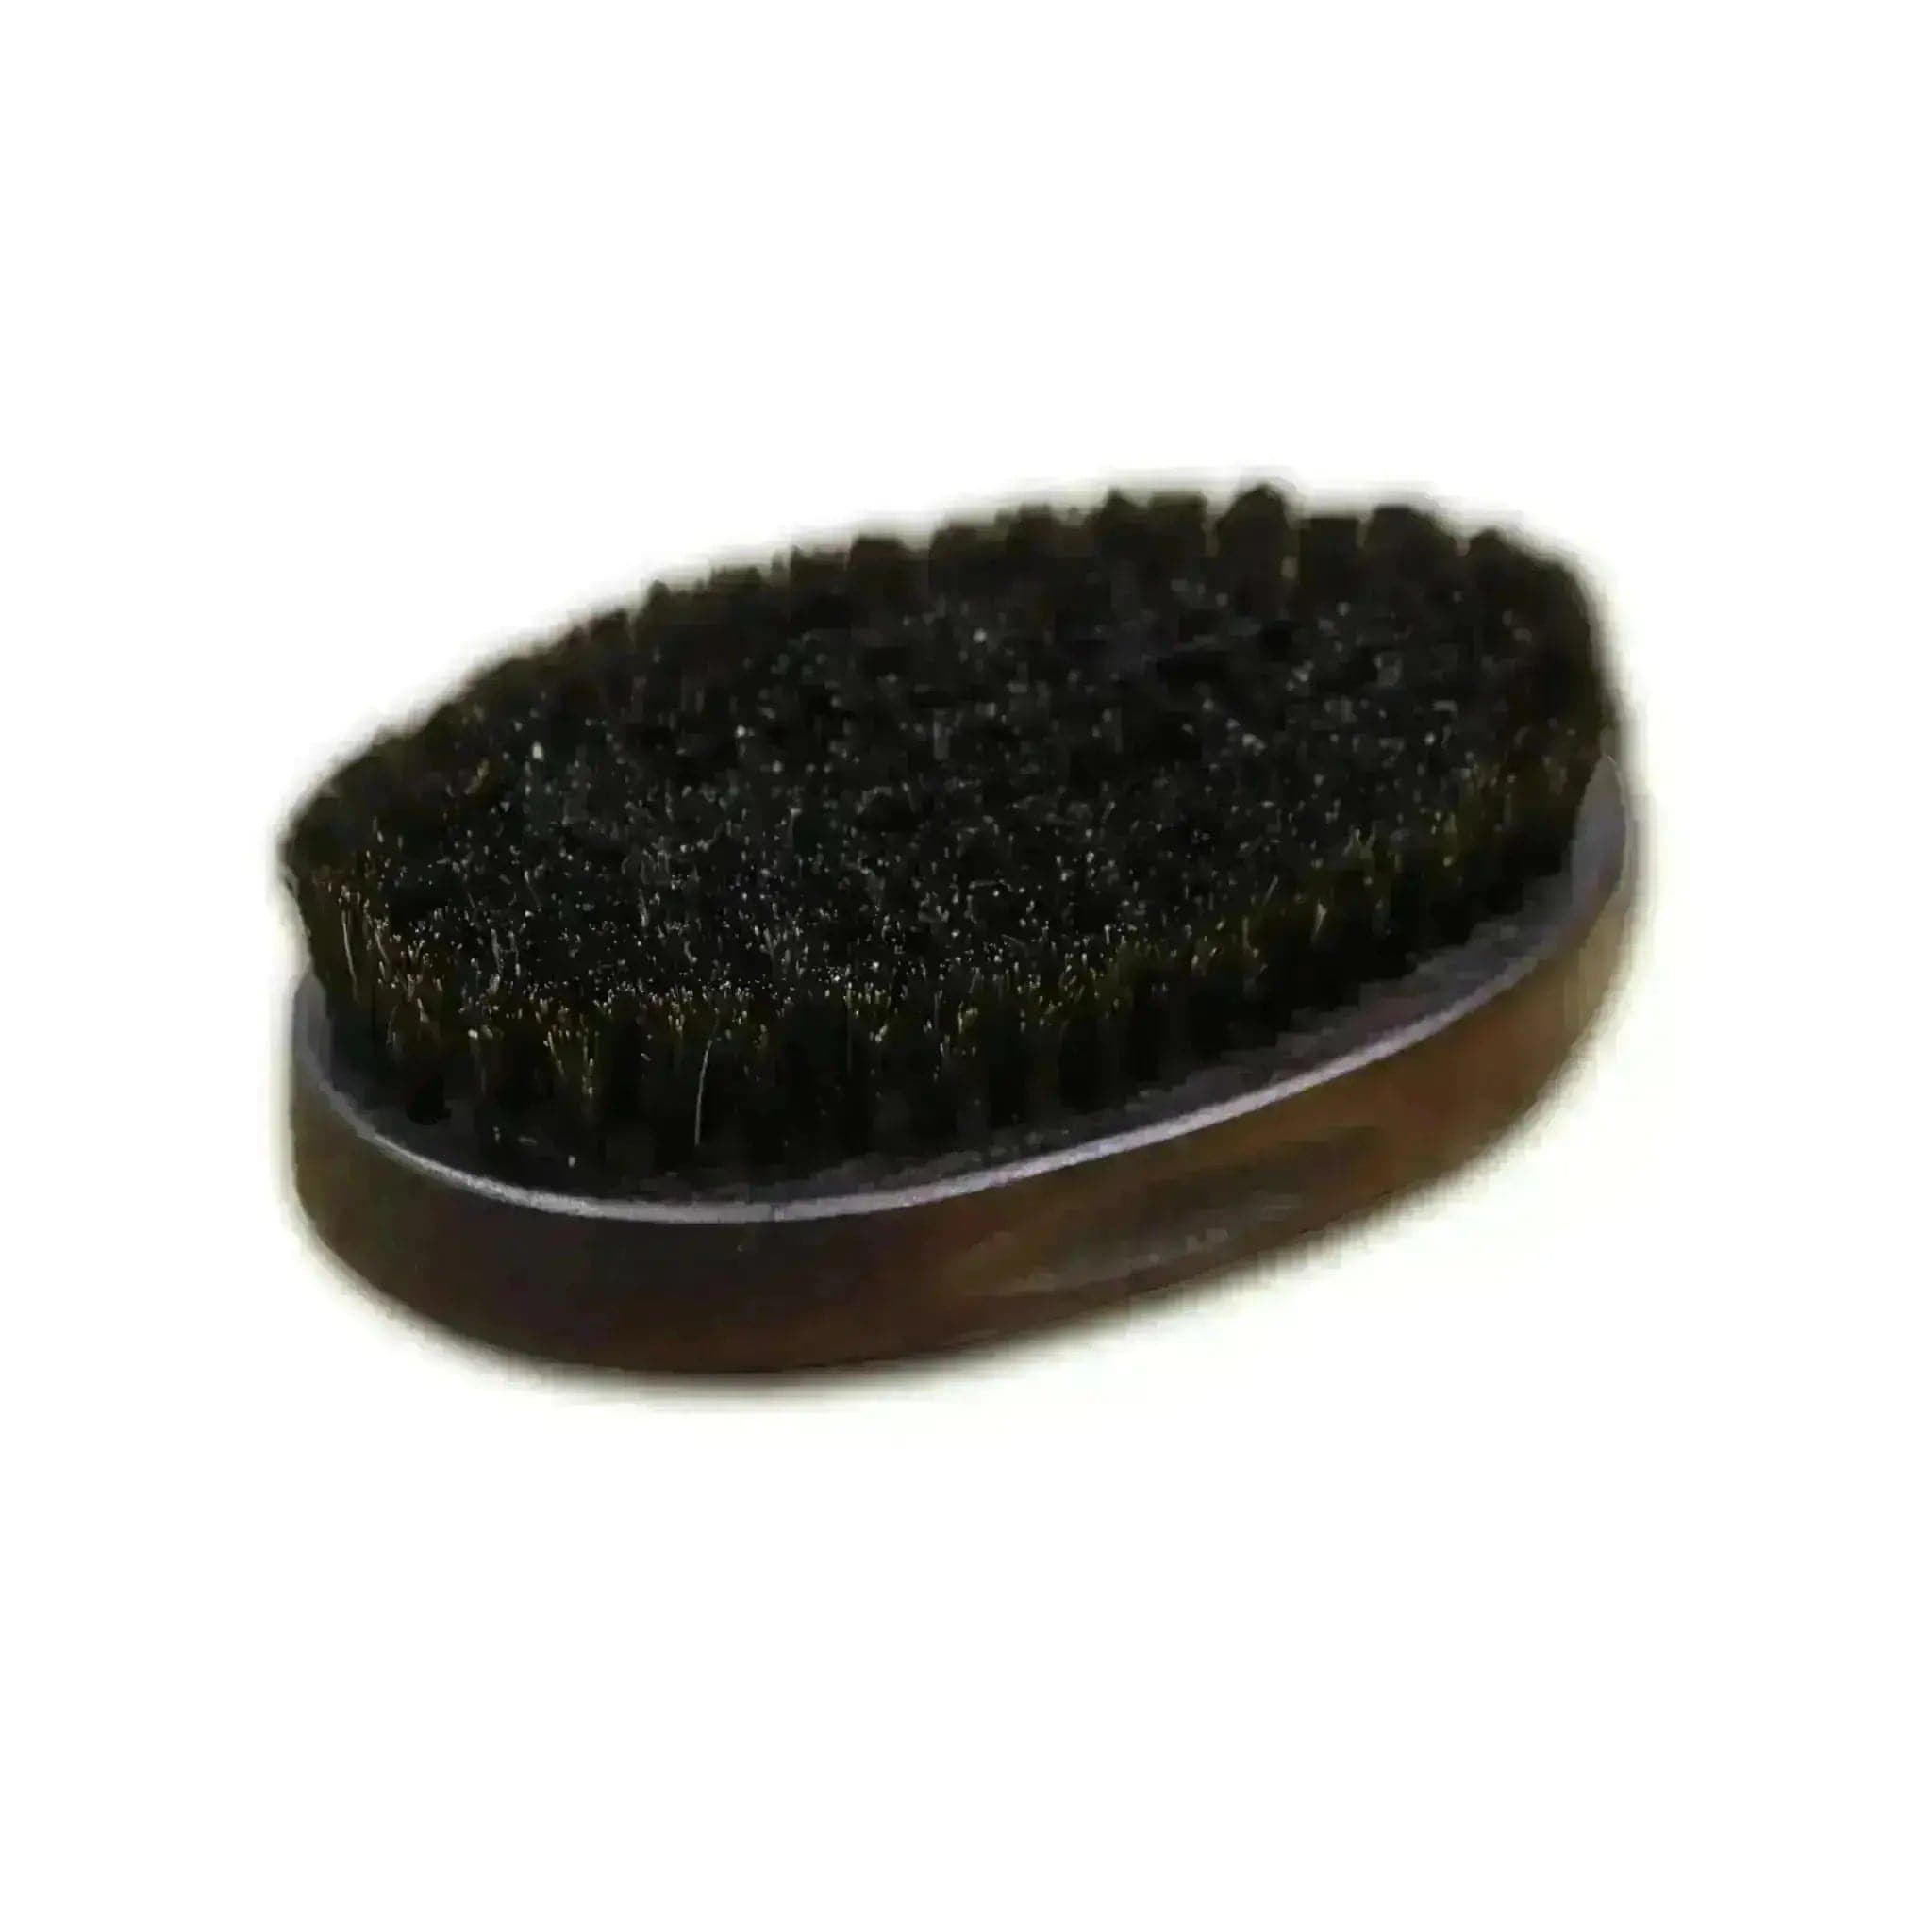 a close up of a hair brush on a white background